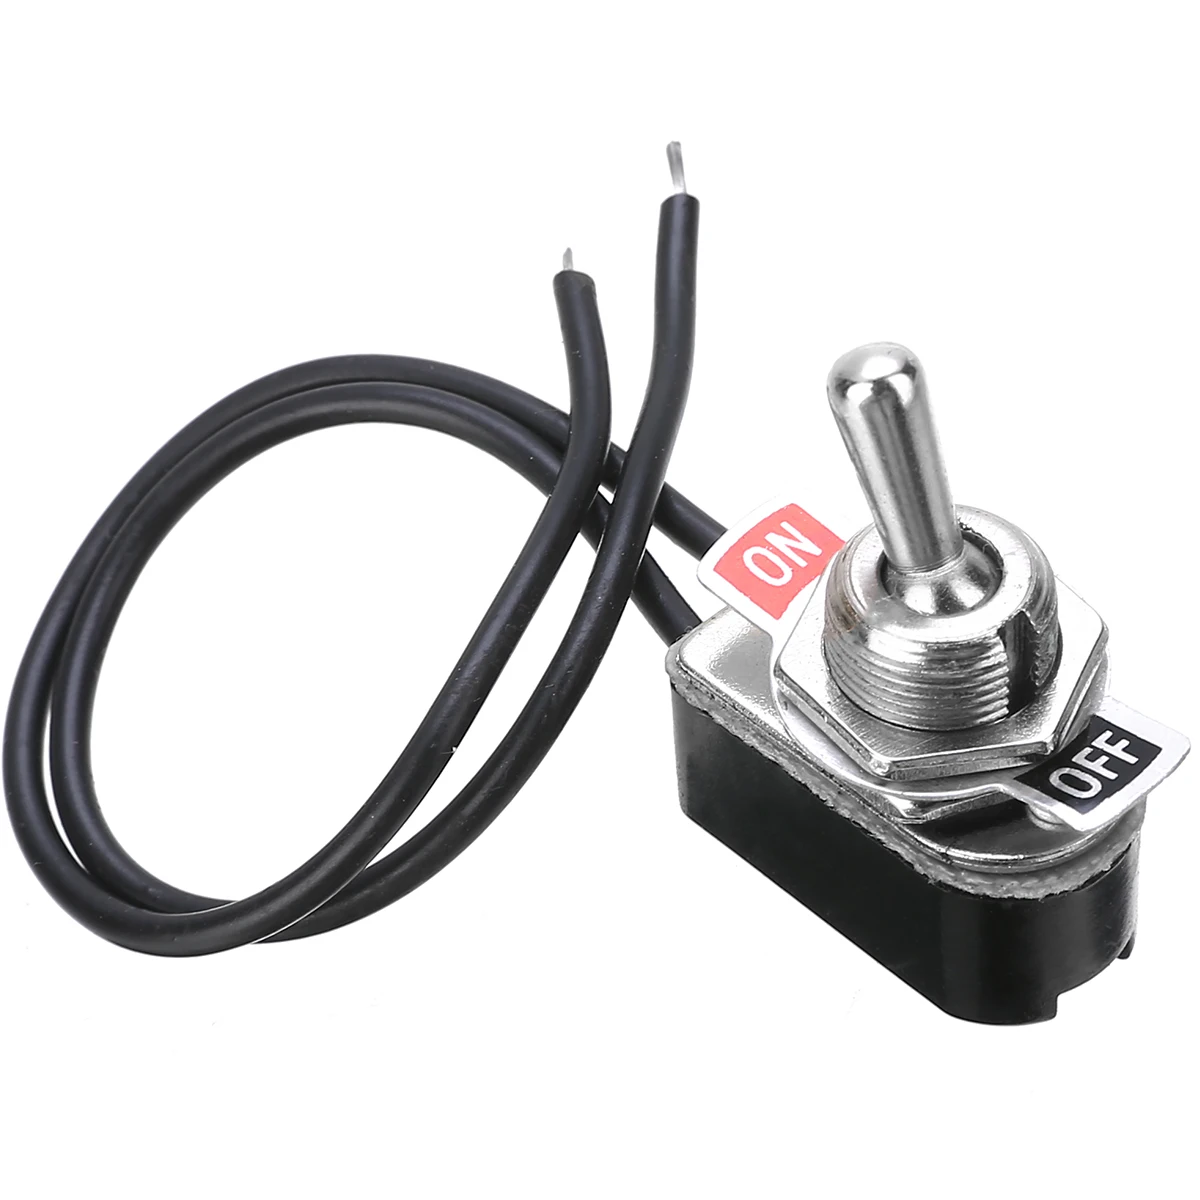 1PC KNS-1 6A 250V AC On-Off Prewired Standard Toggle Switch SPST Contacts Switch with Wire High Quality